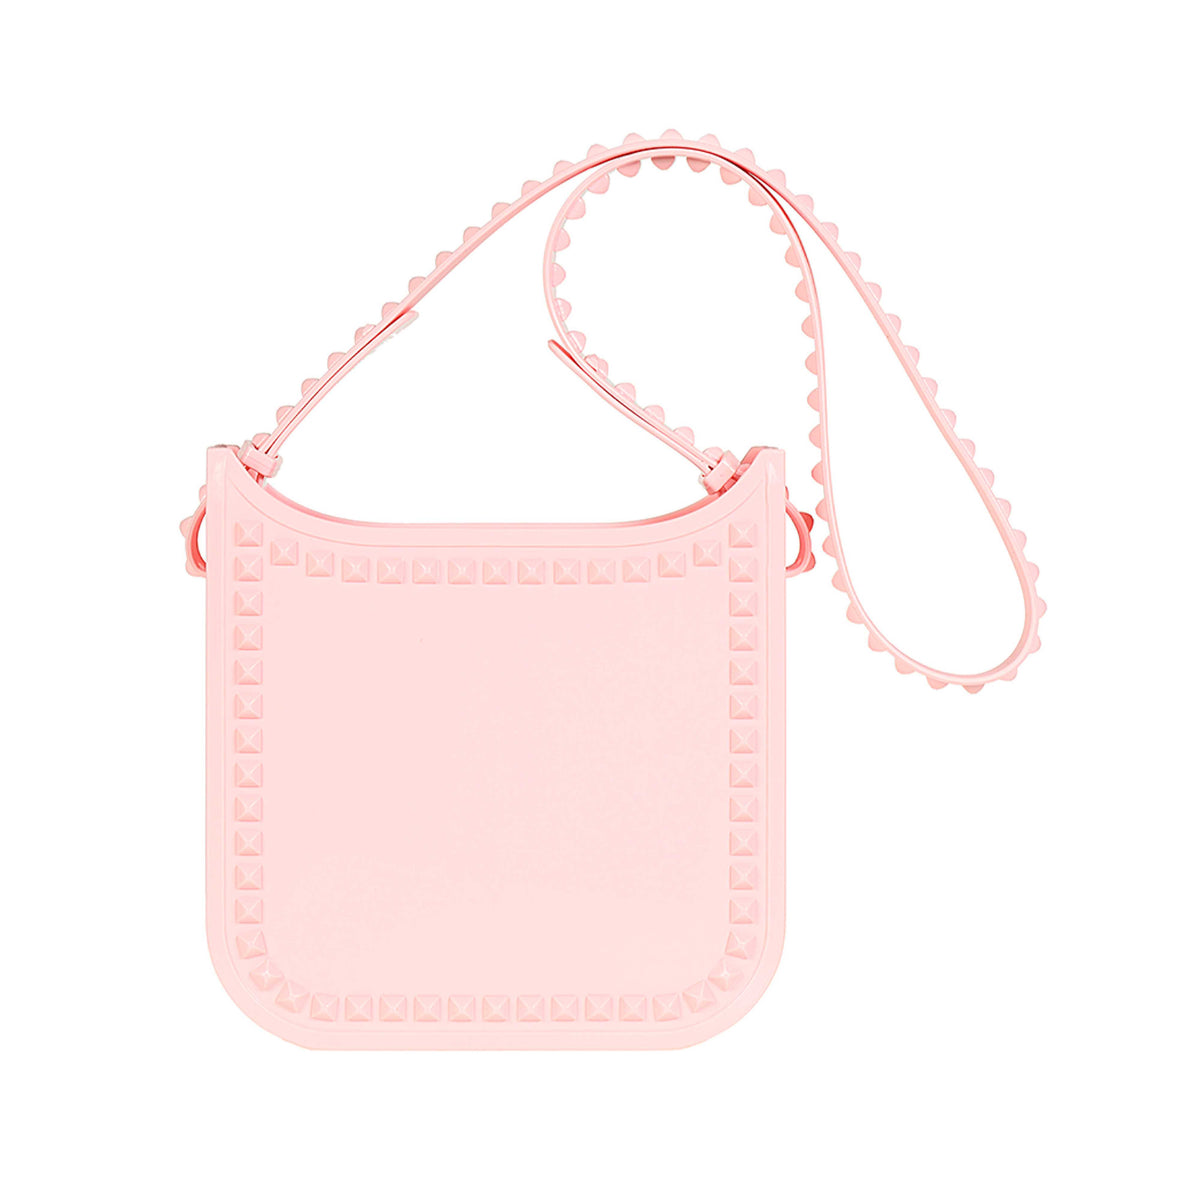 Toni jelly bags with studs in color baby pink